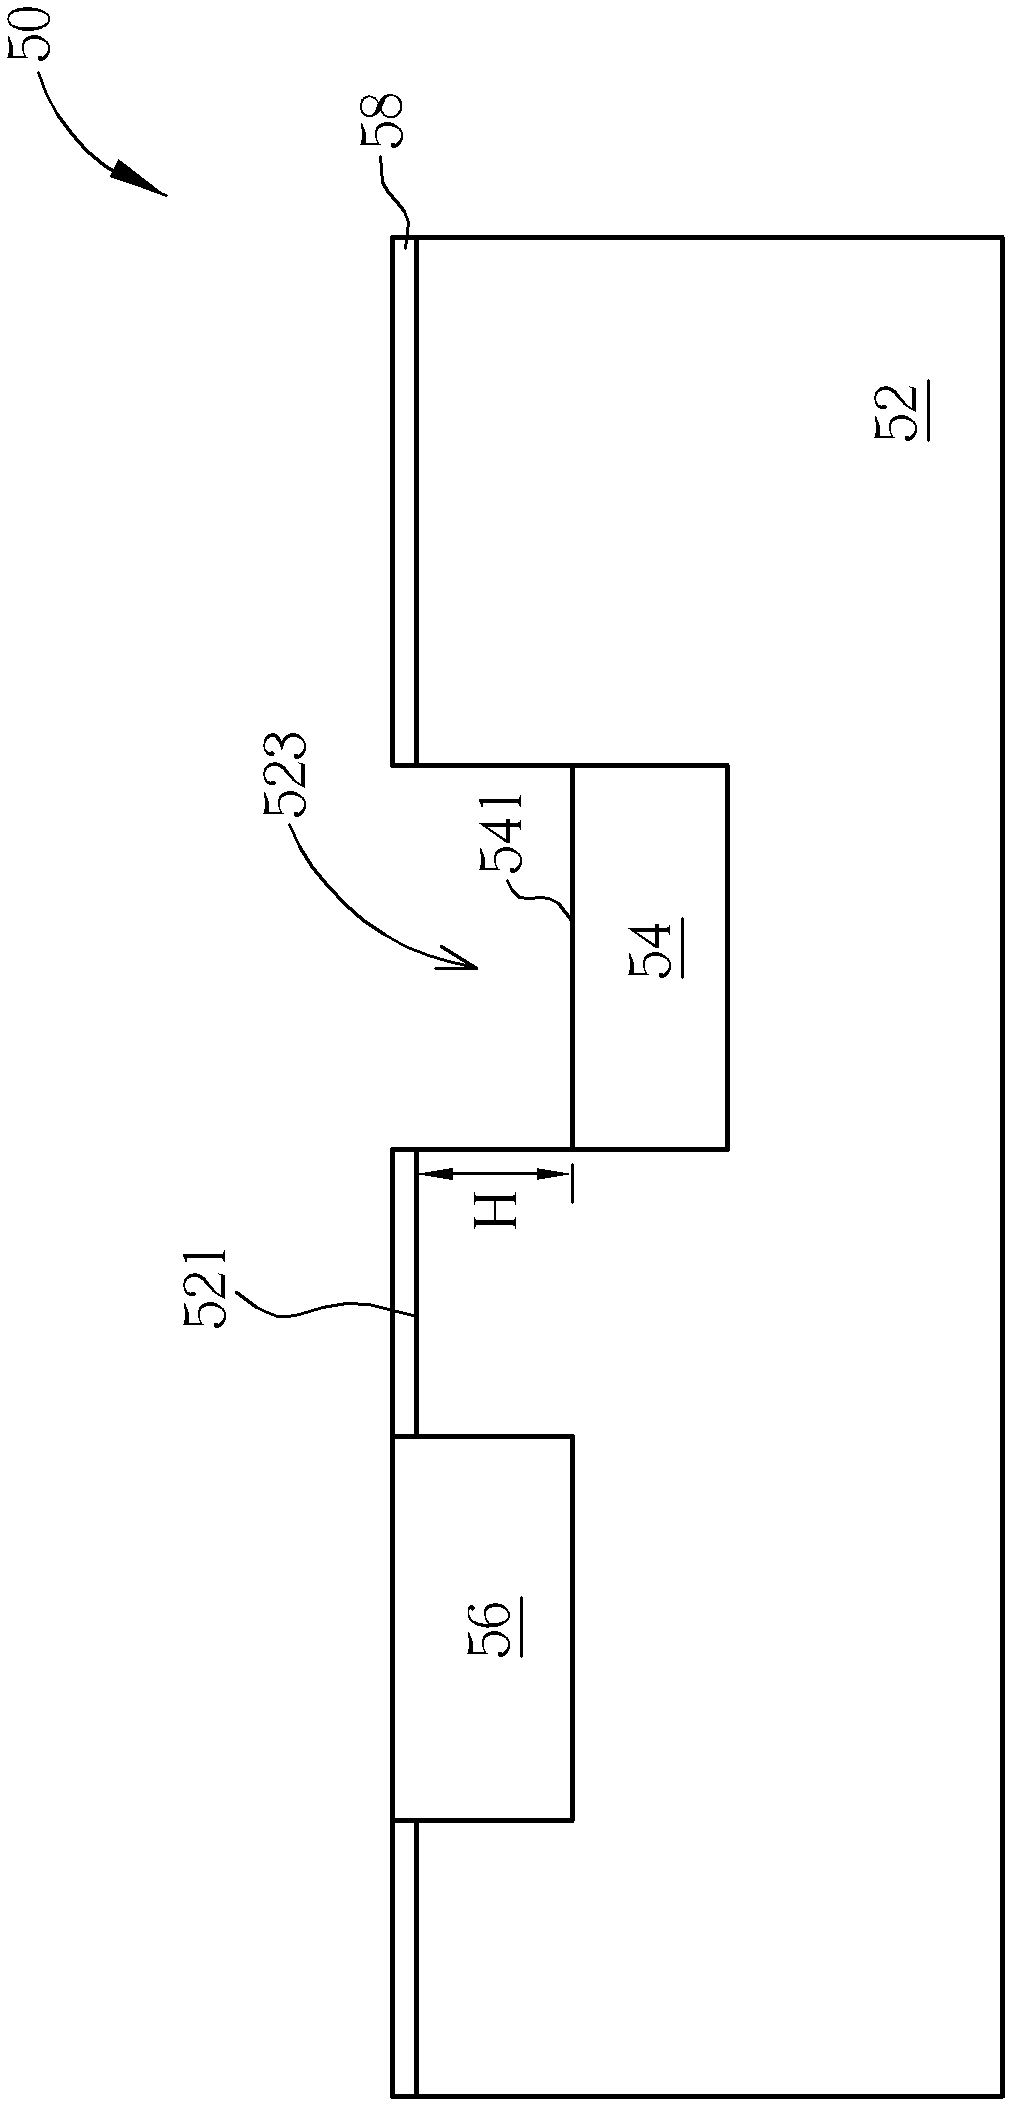 Circuit board capable of preventing contact of a gold finger and solder